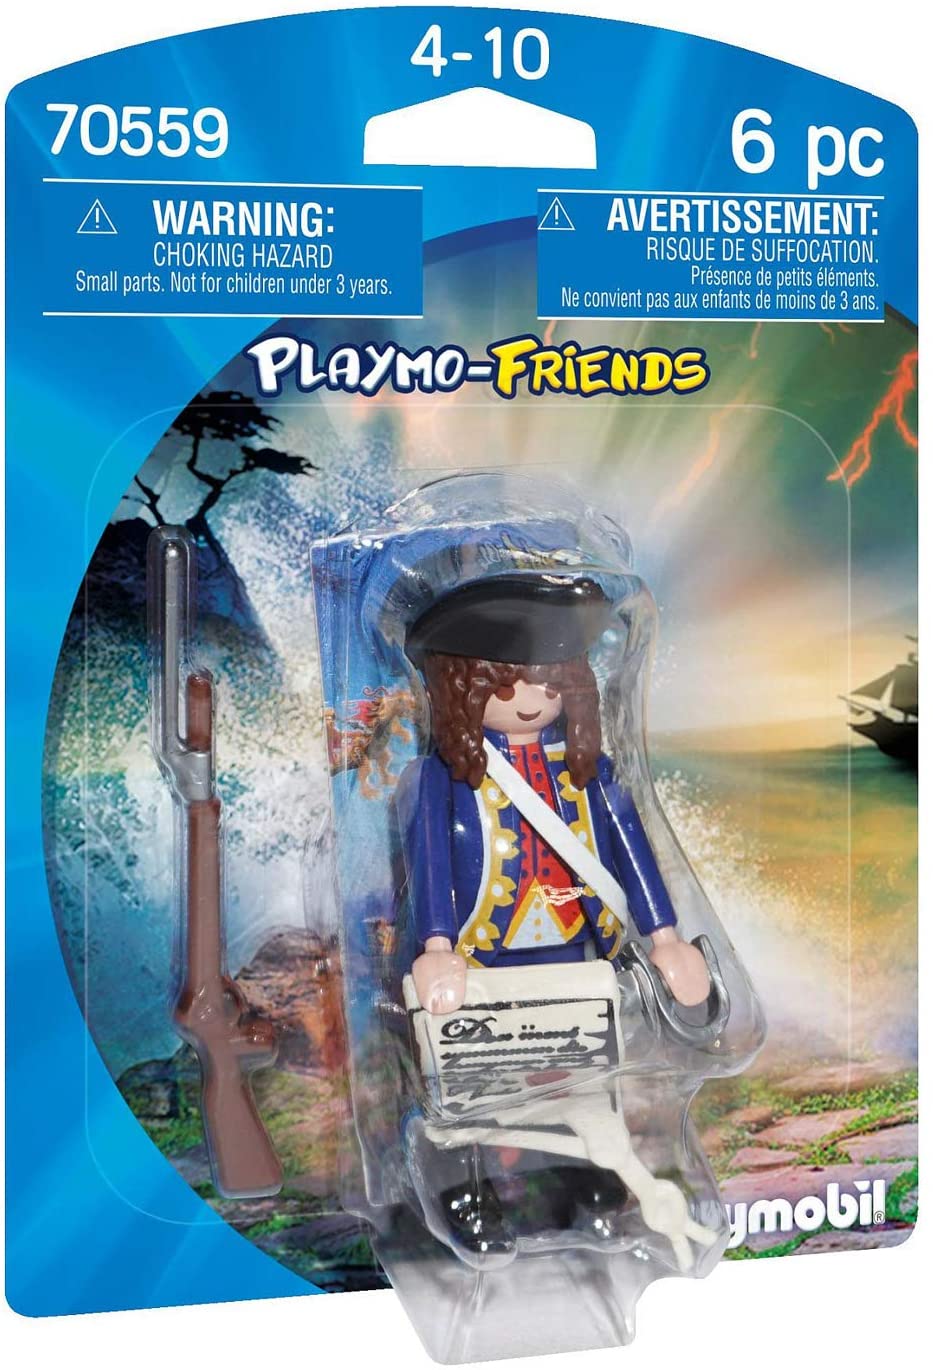 Playmobil 70559 Playmo-Friends Royal Soldier, for Children Ages 4+